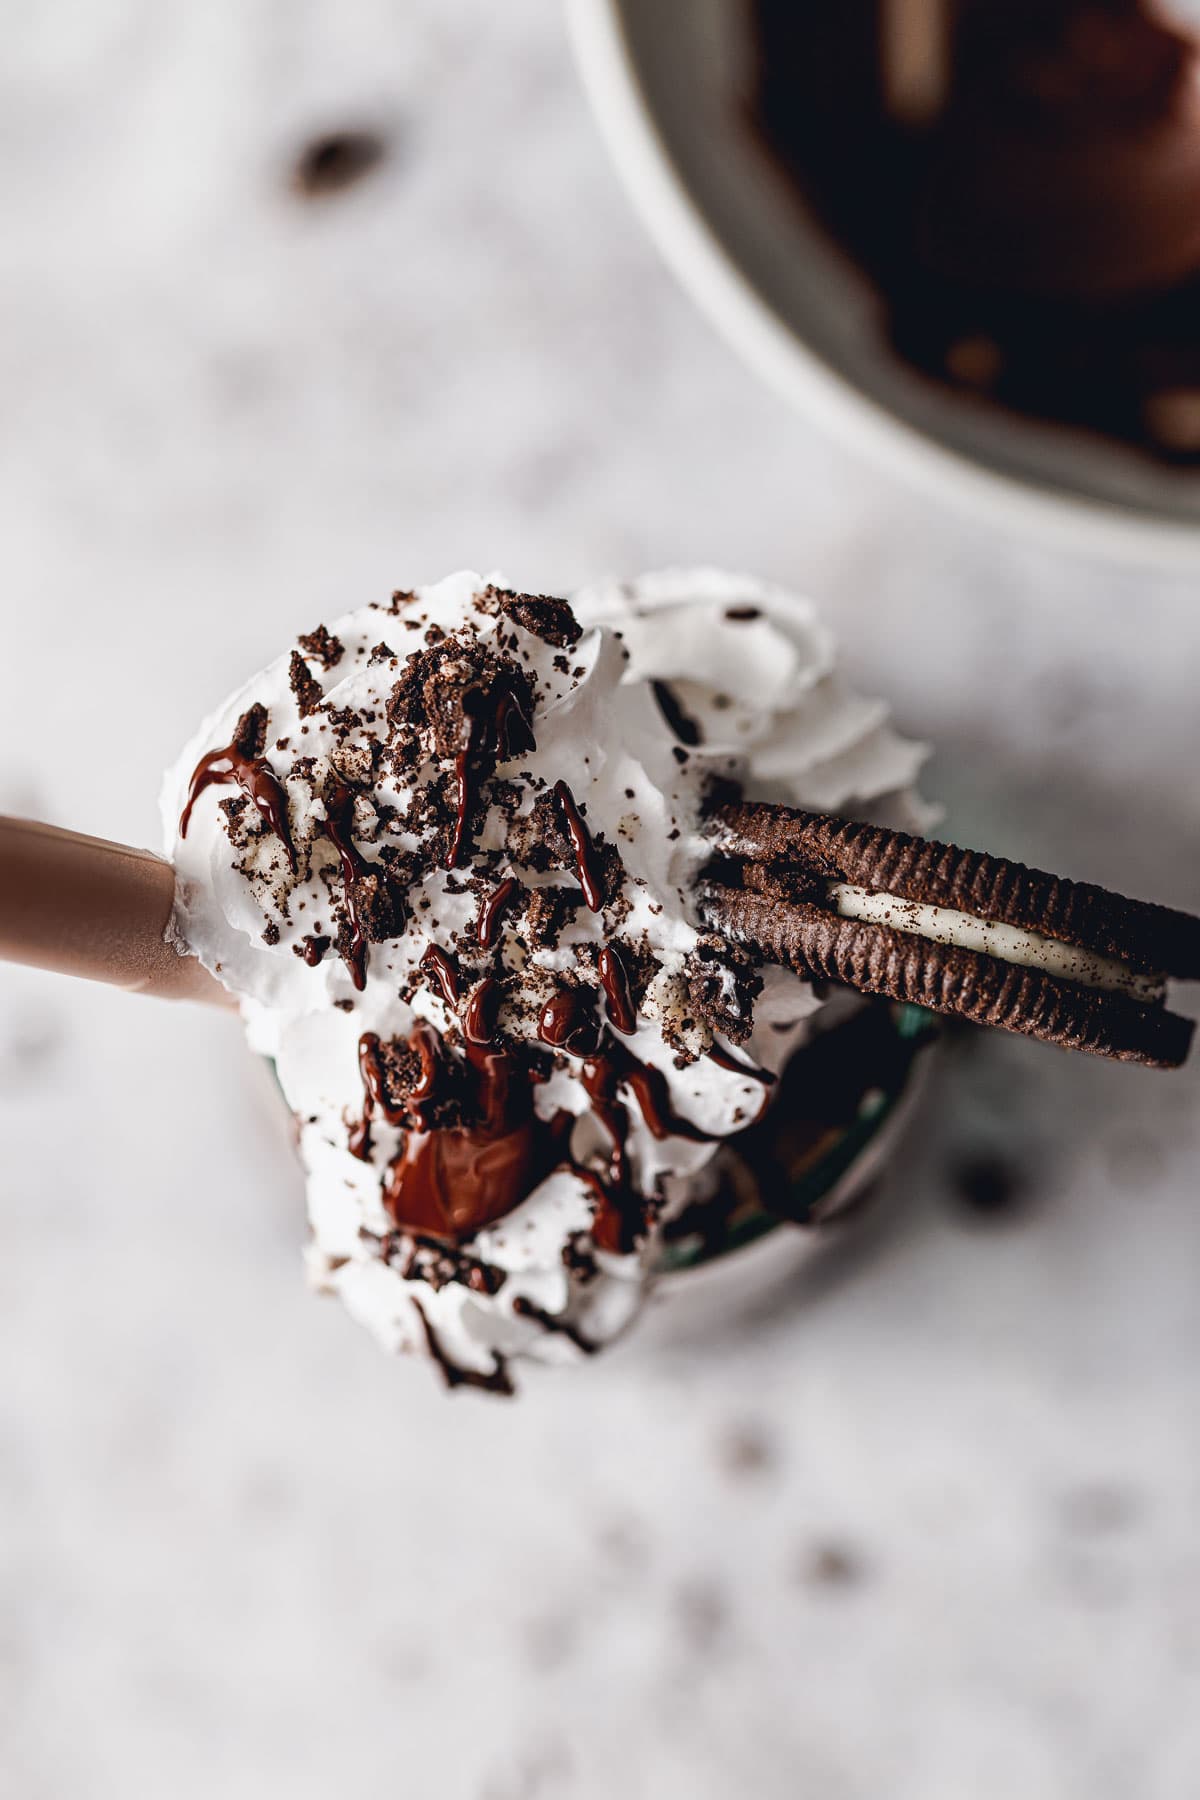 A close-up image of a top of Oreo frappe.